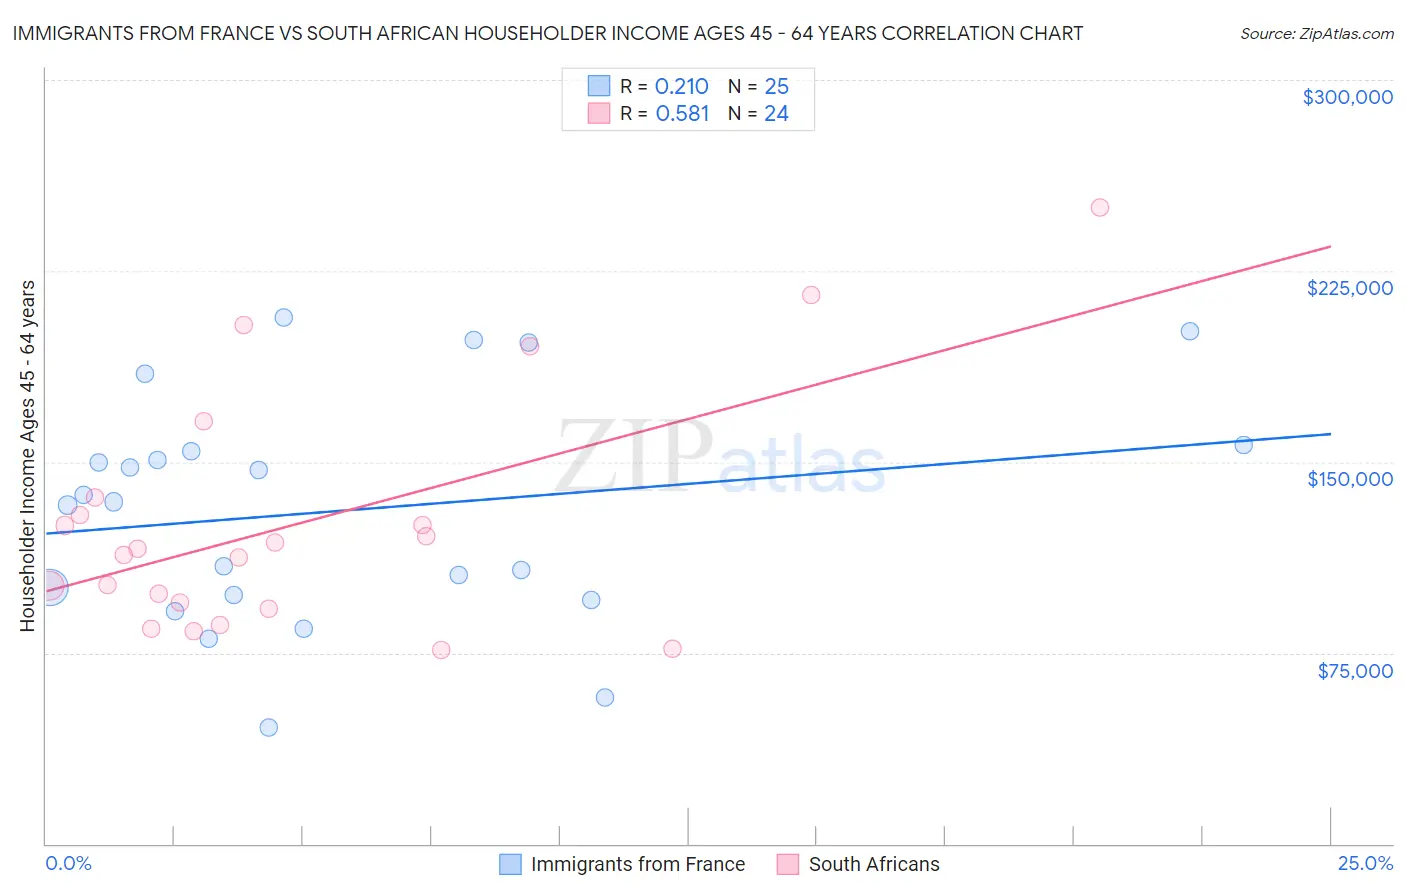 Immigrants from France vs South African Householder Income Ages 45 - 64 years